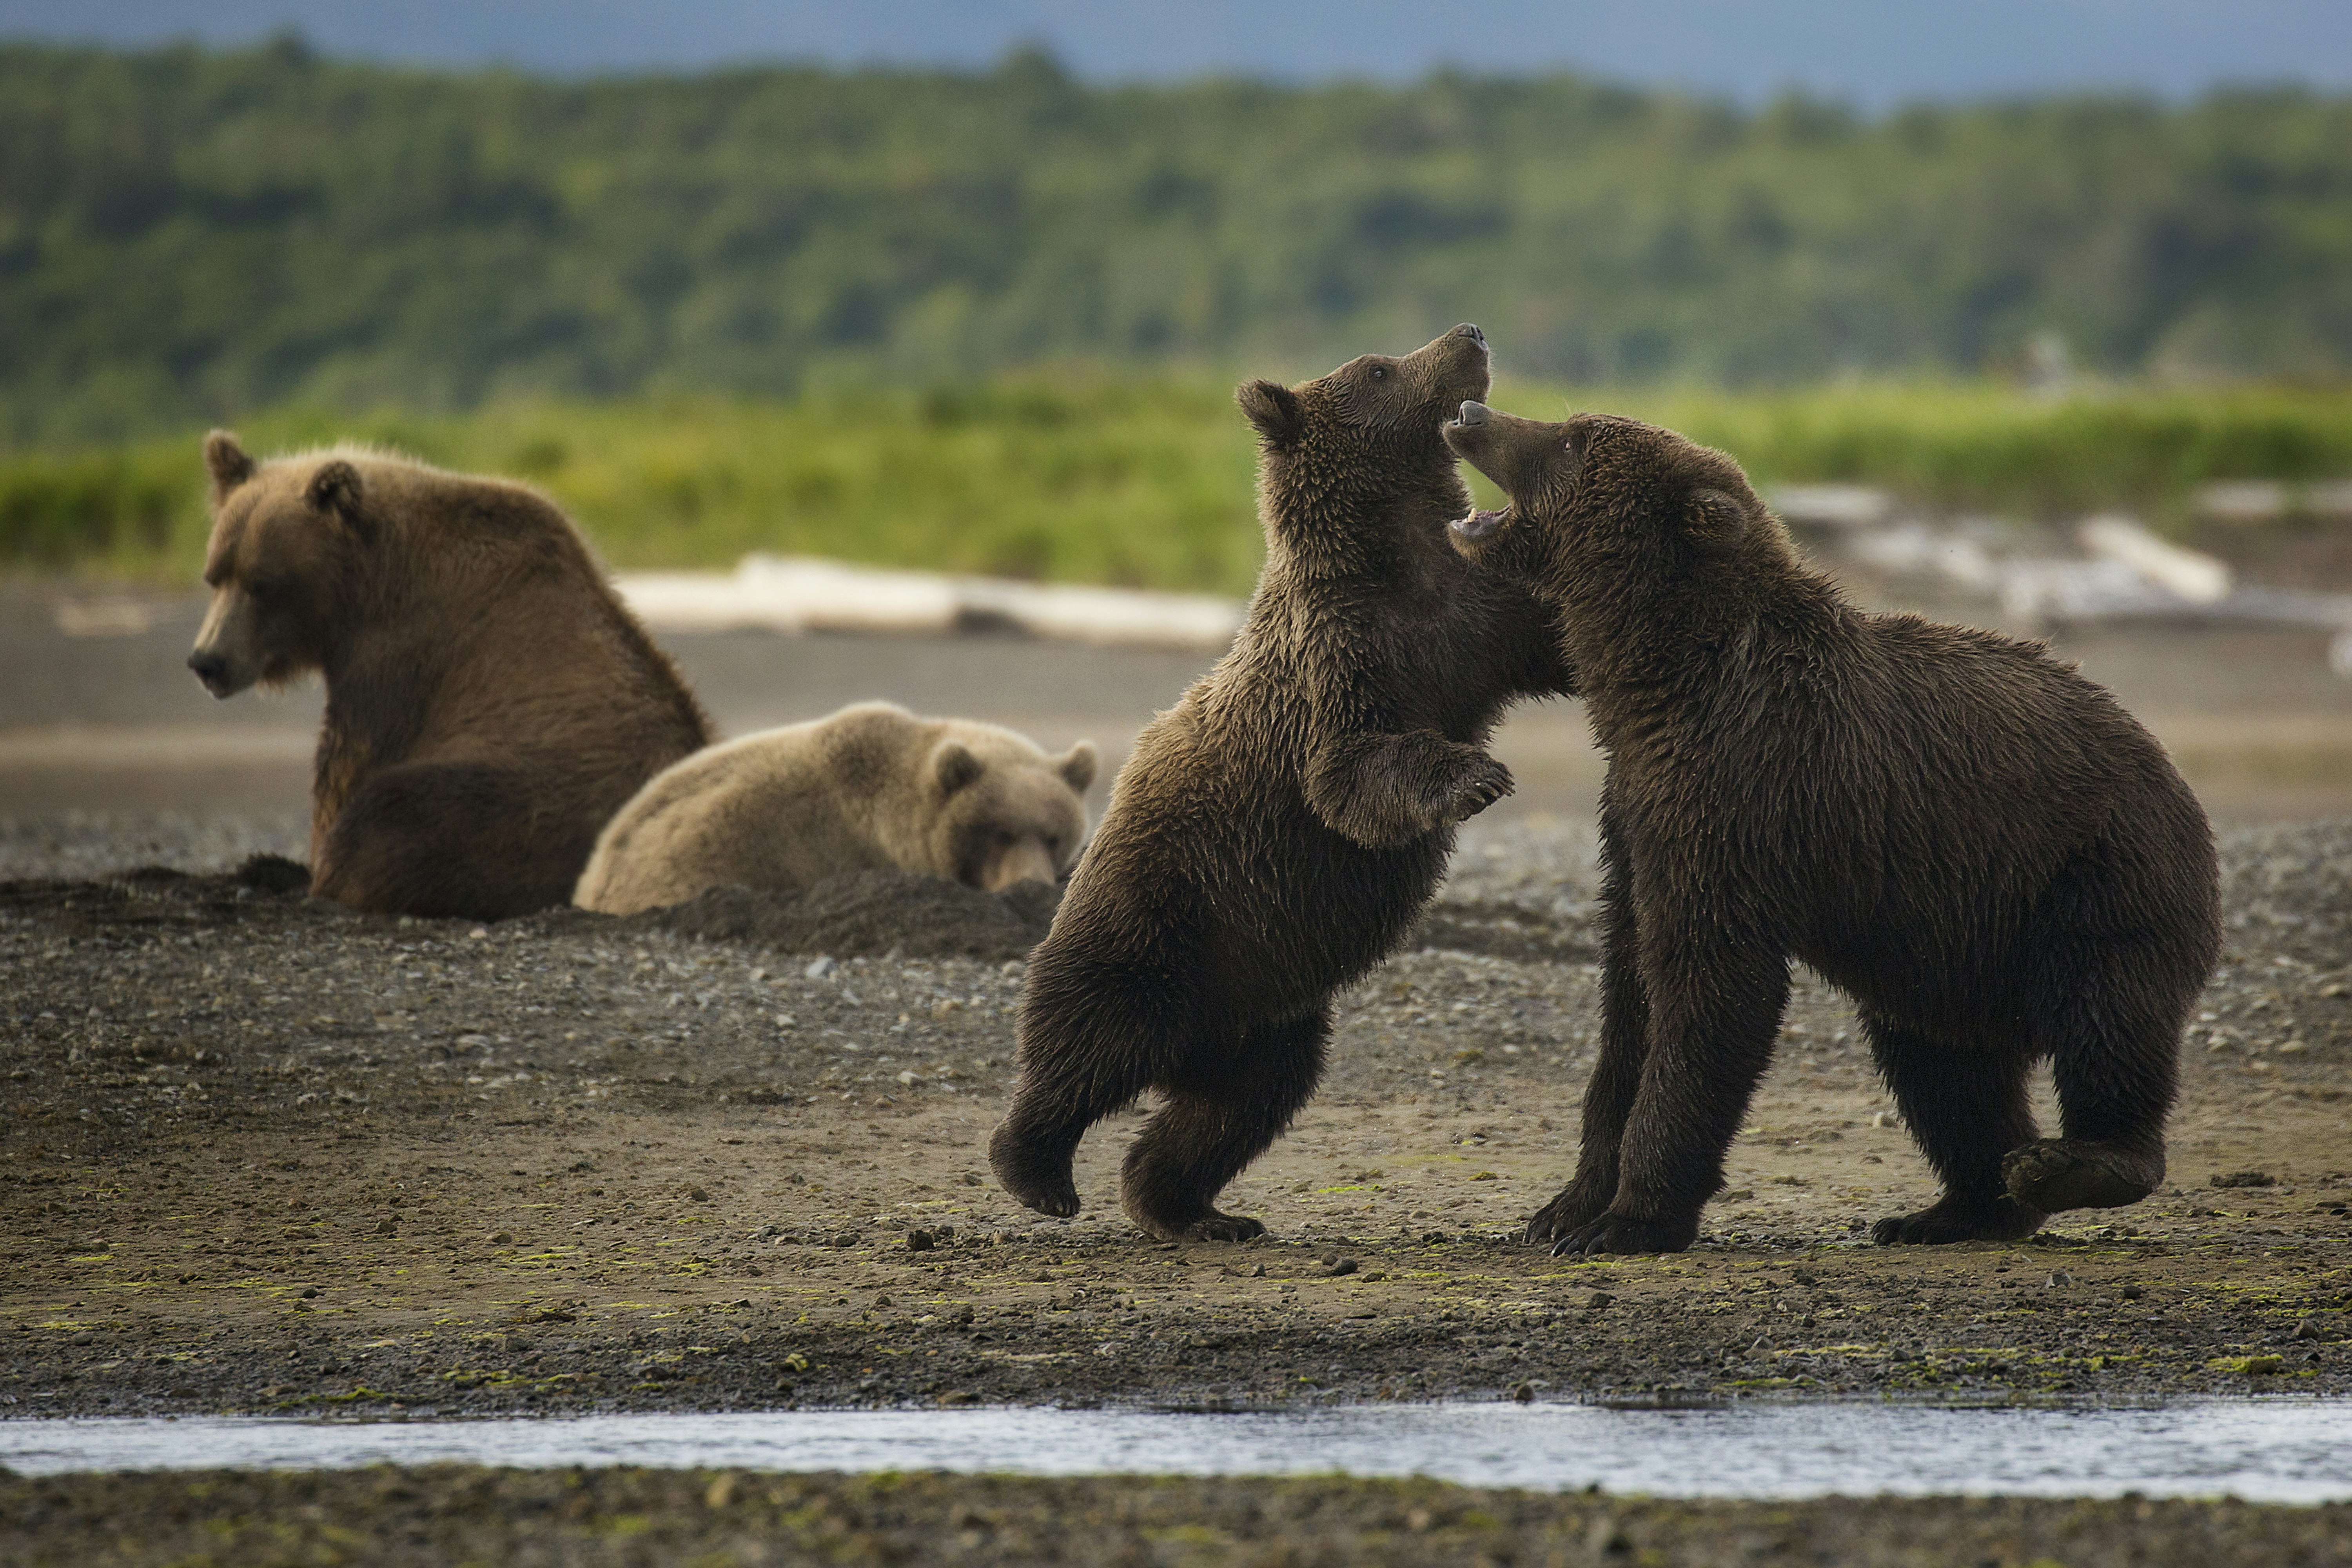 Bears jump up against each other as two more watch from behind. National Parks: The best free things to do in the US parks